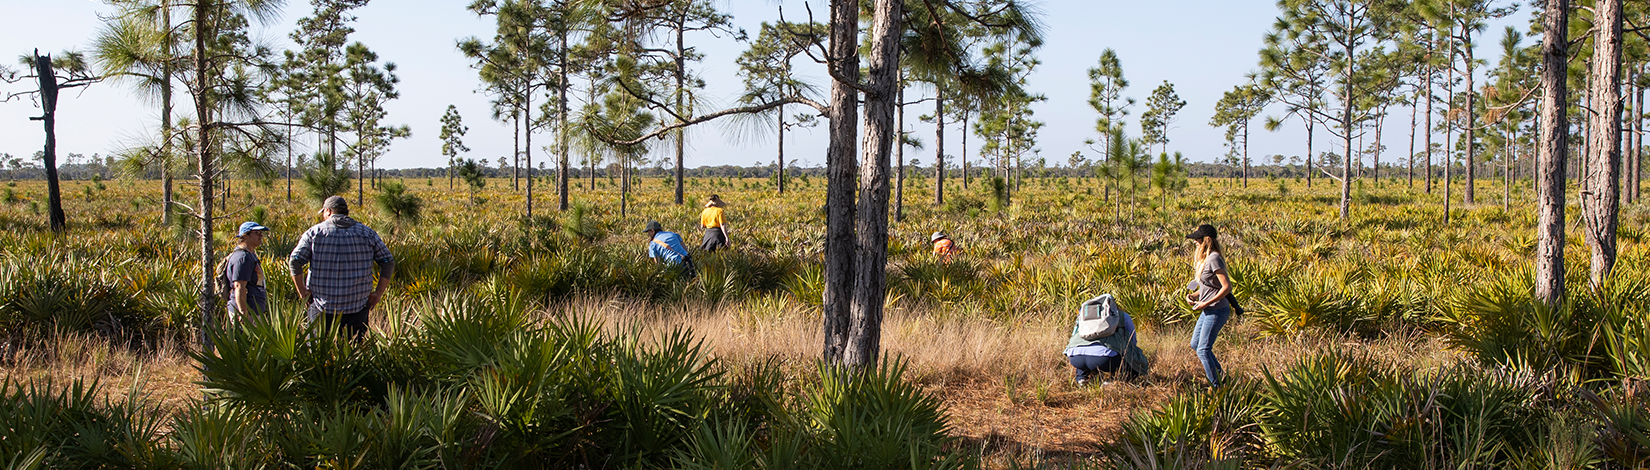 Three pairs of students collect biodiversity samples in a young pine forest.